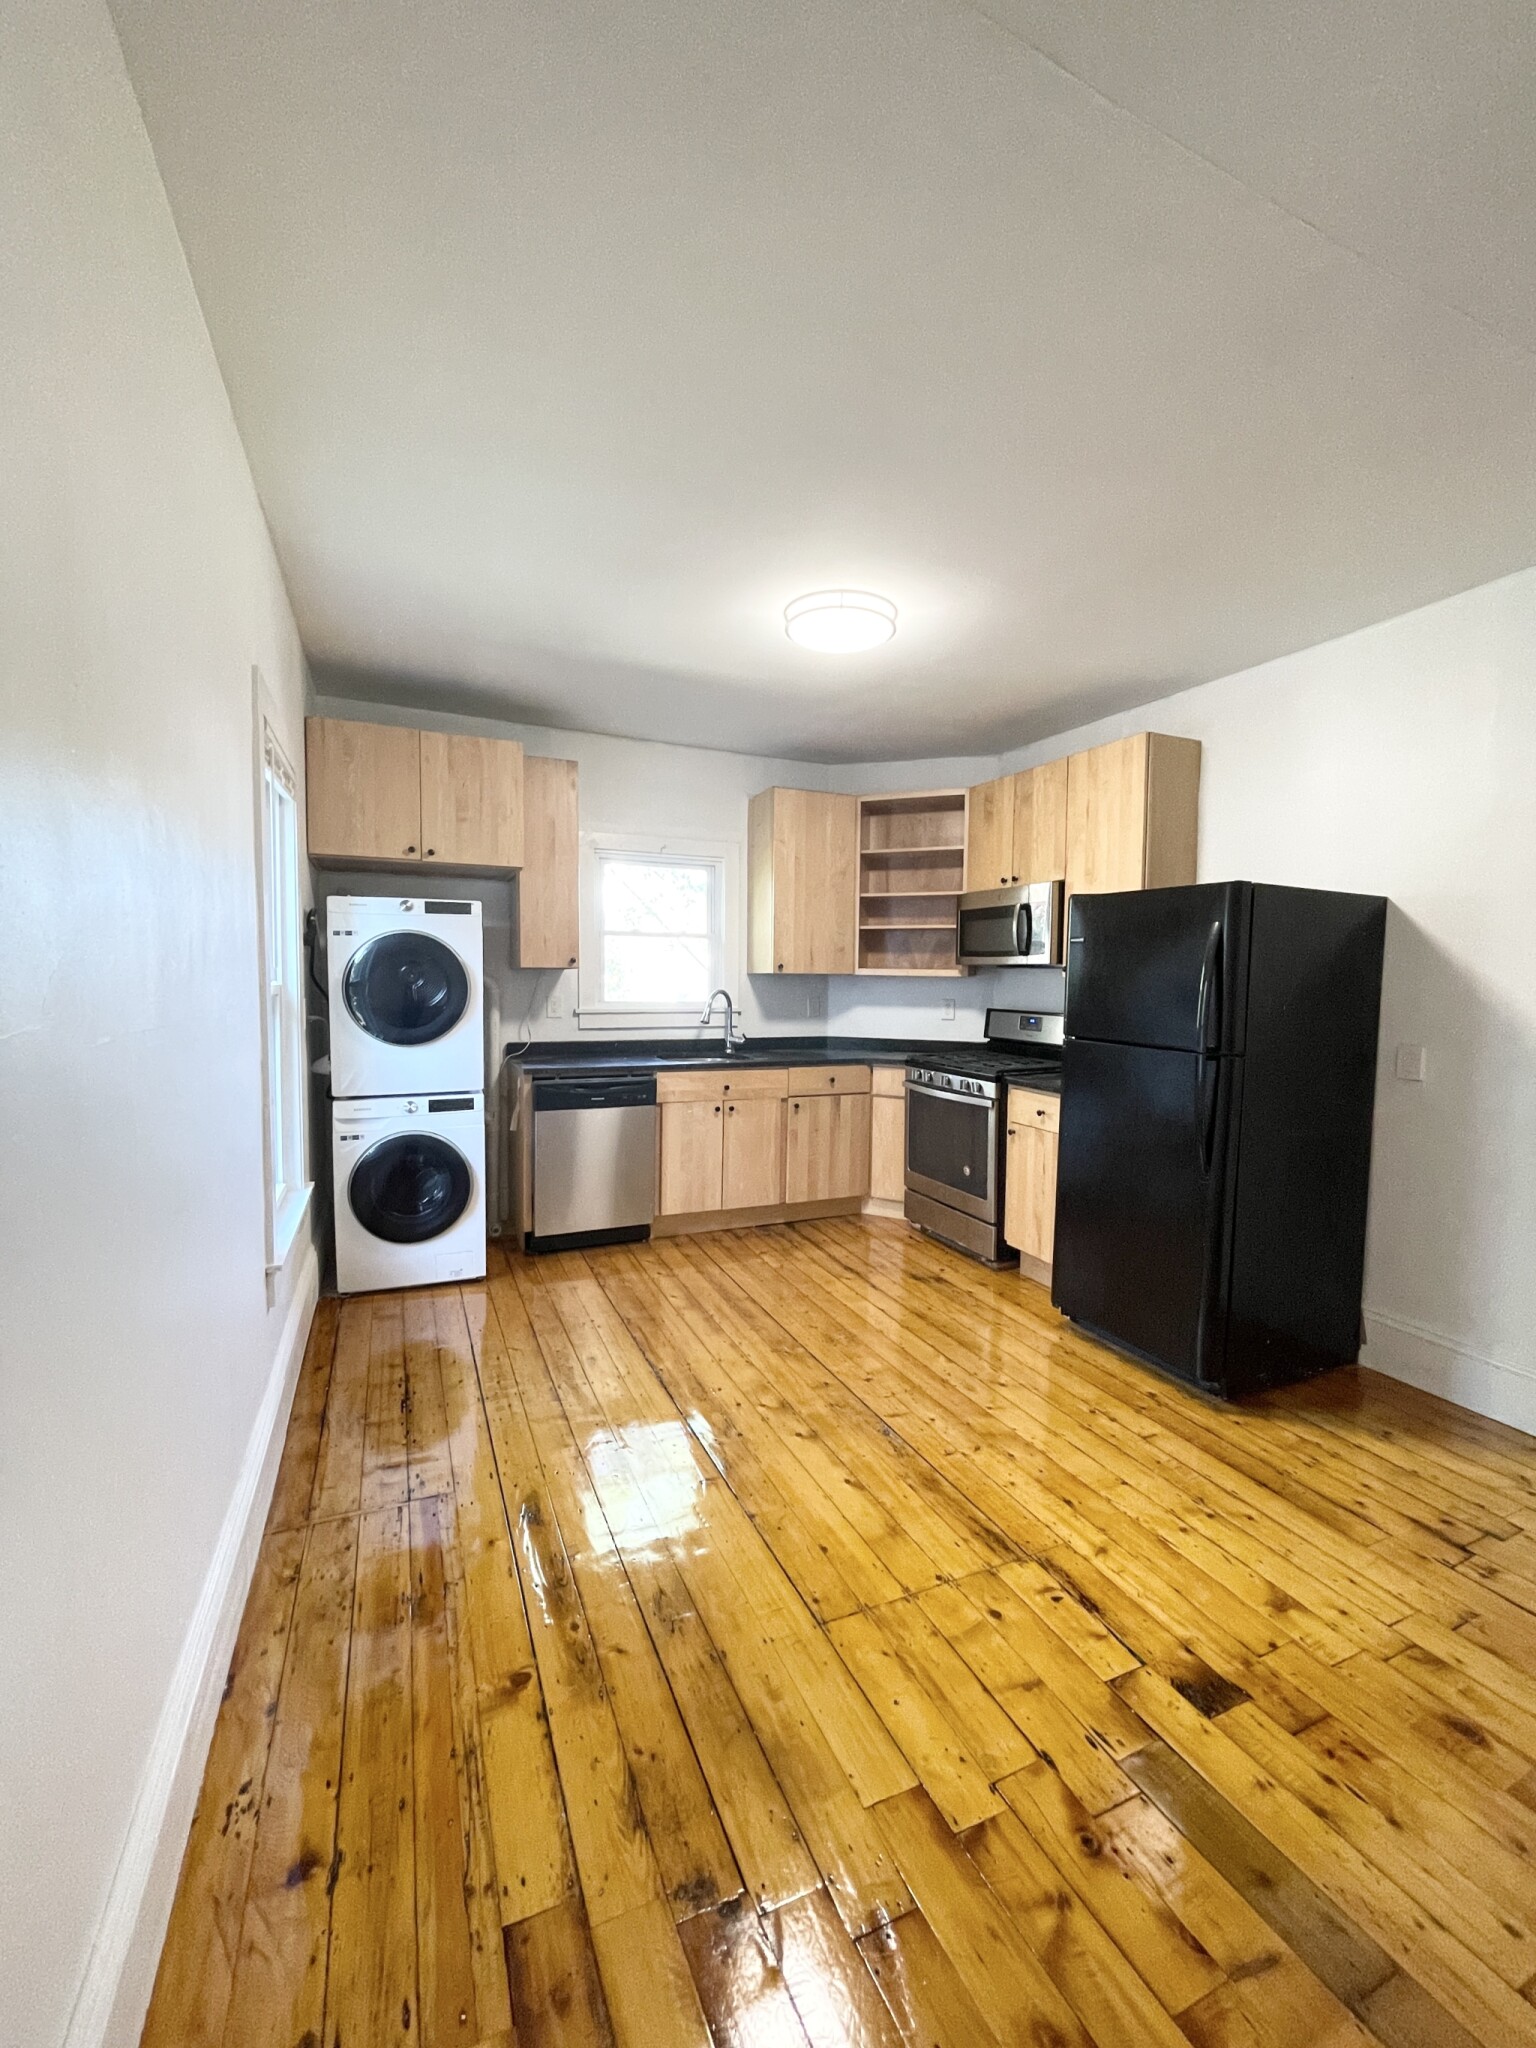 Photos of apartment on Munroe St.,Somerville MA 02143